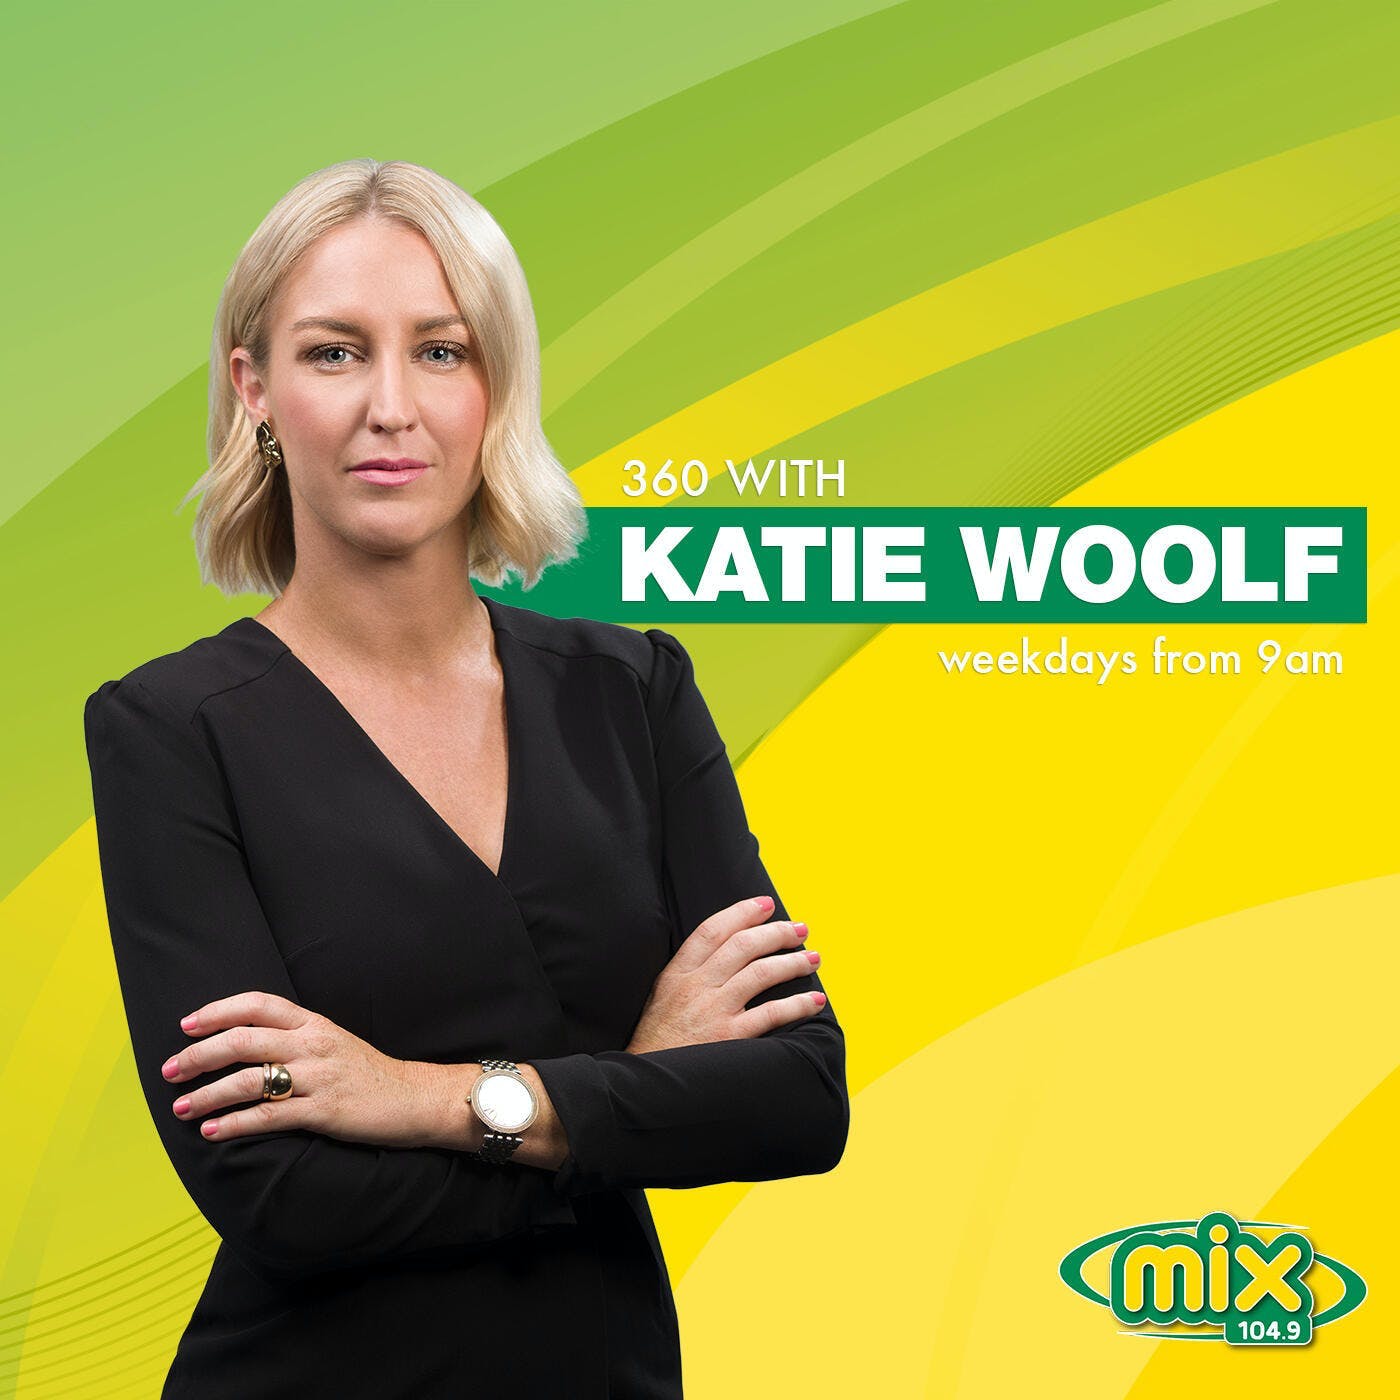 Katie spoke with Minister for Urban Housing Kate Worden about a funding announcement for more affordable housing in the NT